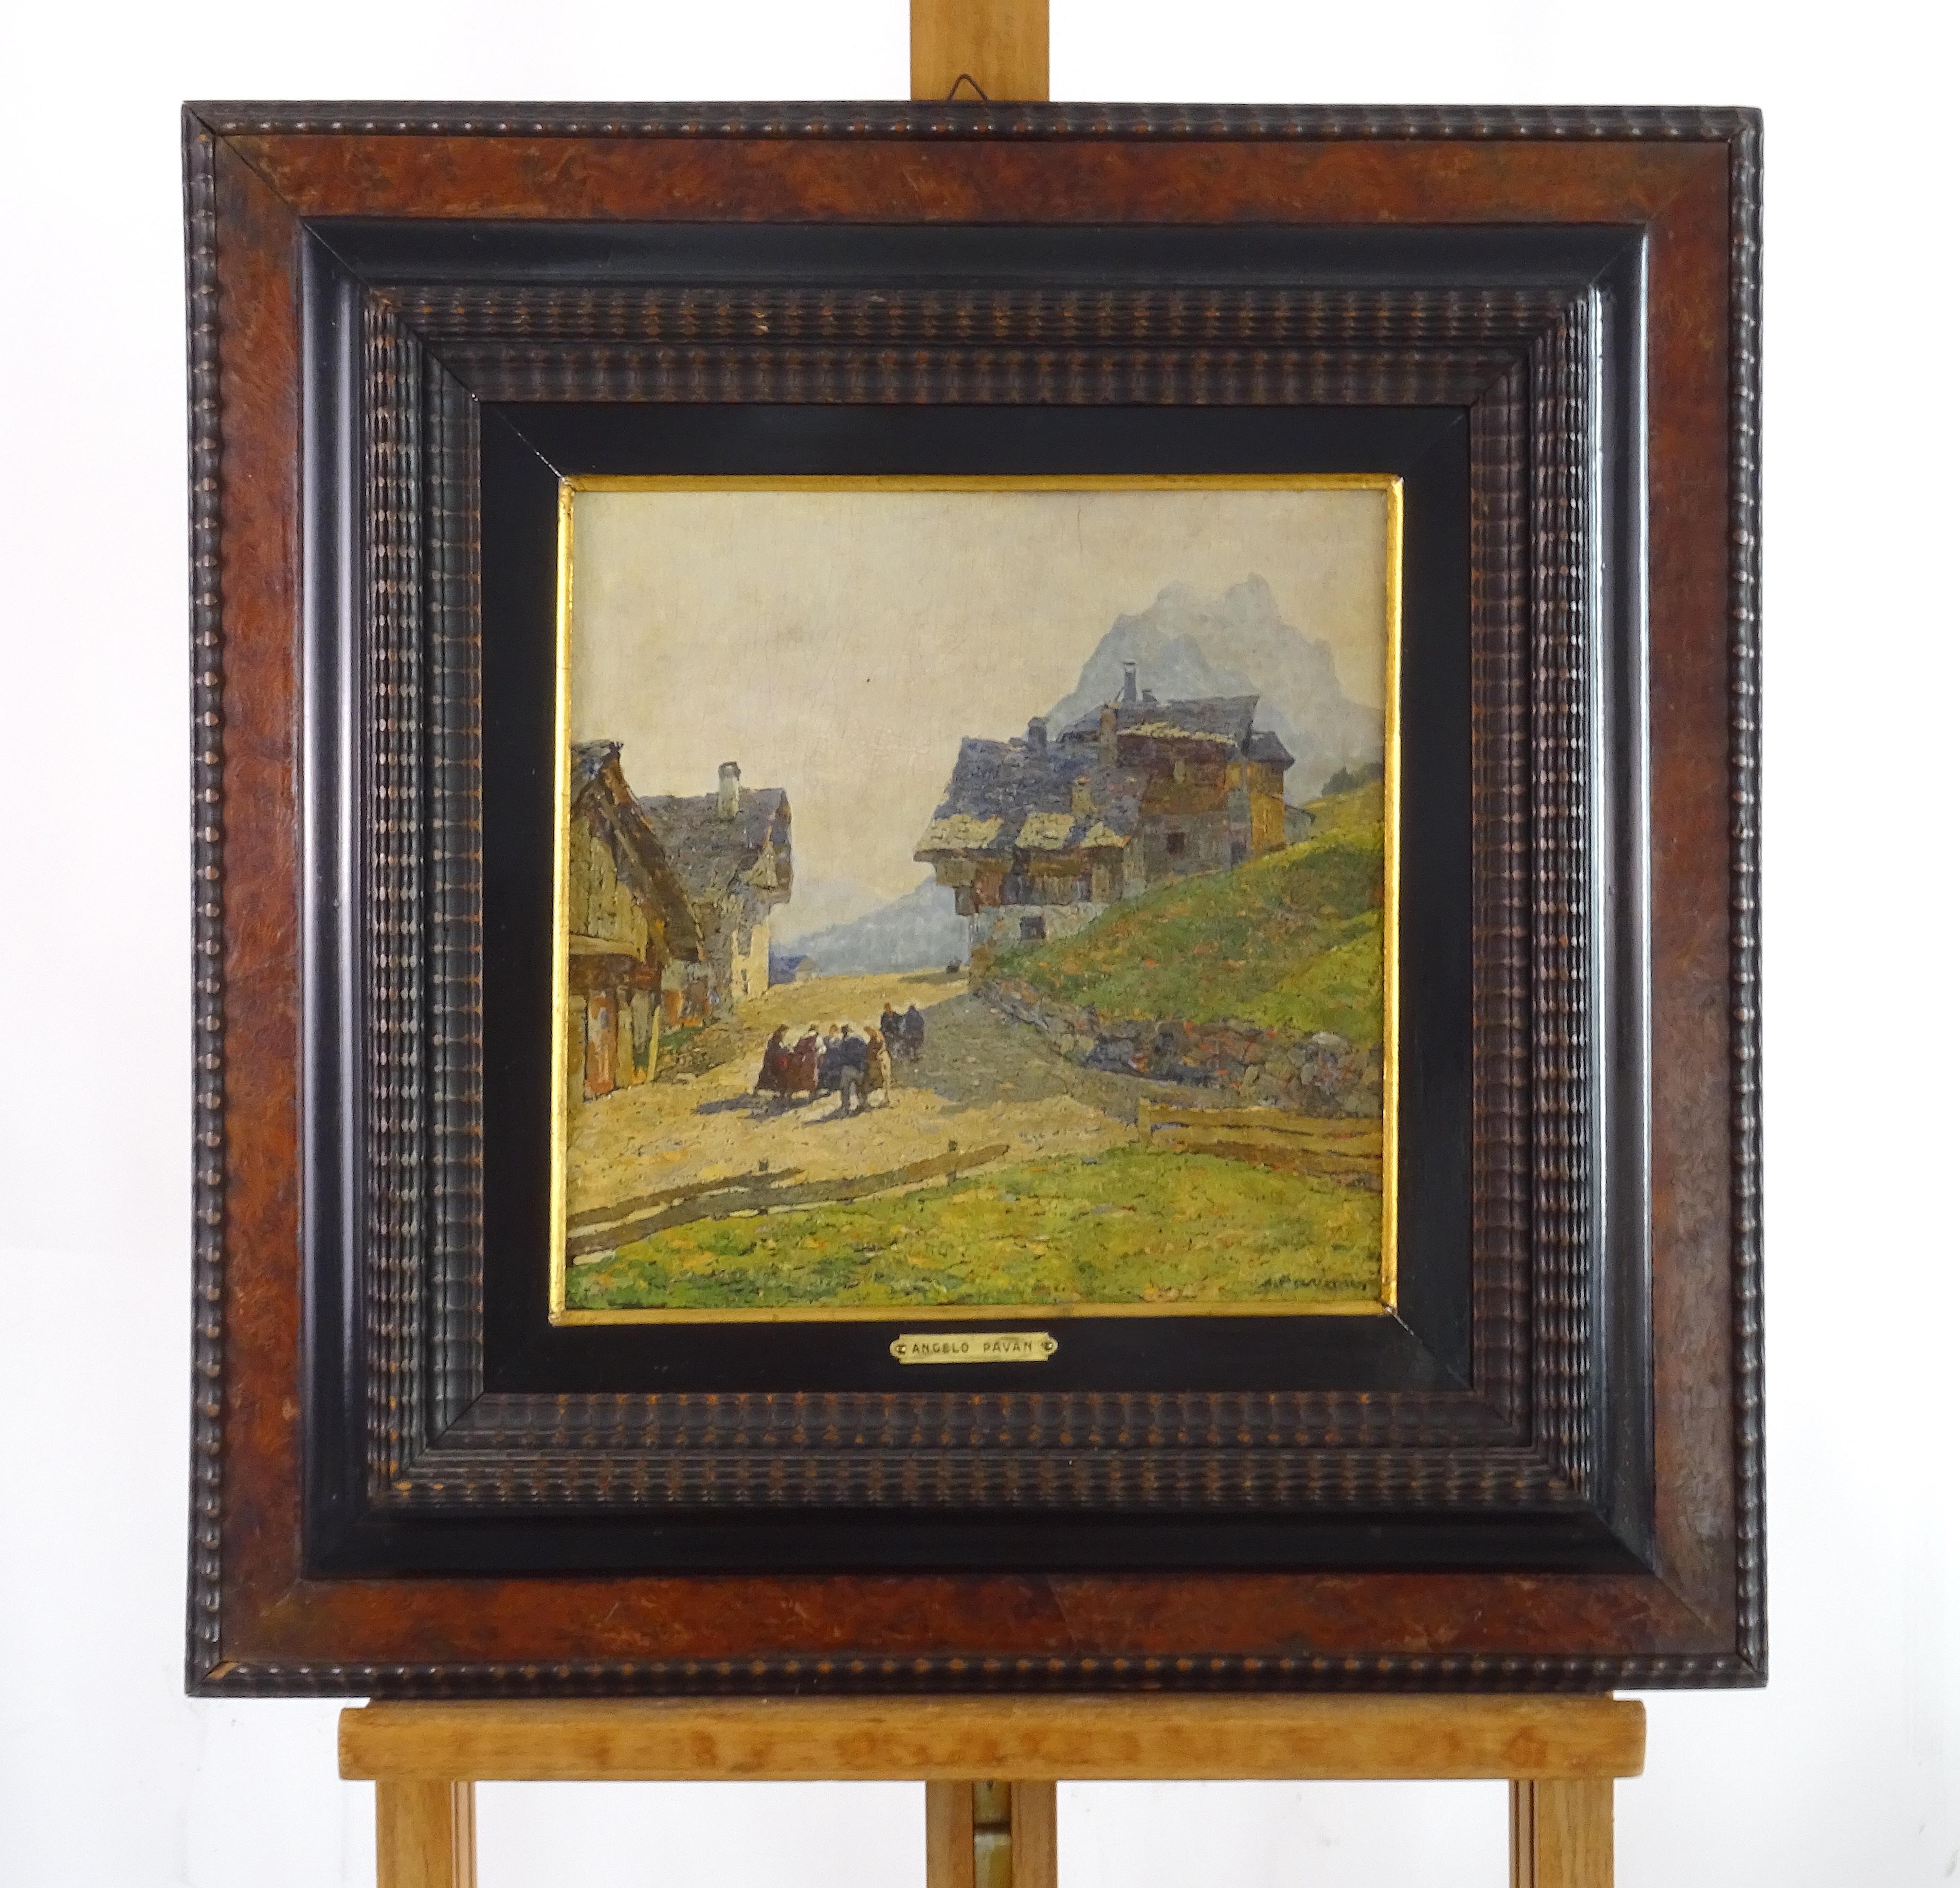 Oil painting on a plywood panel, depicting a mountain view with houses and figures in the foreground.
The pictorial drafting is characterised by a very textured painting composed almost of 'tesserae' of colour, identifying the artist Pavan's